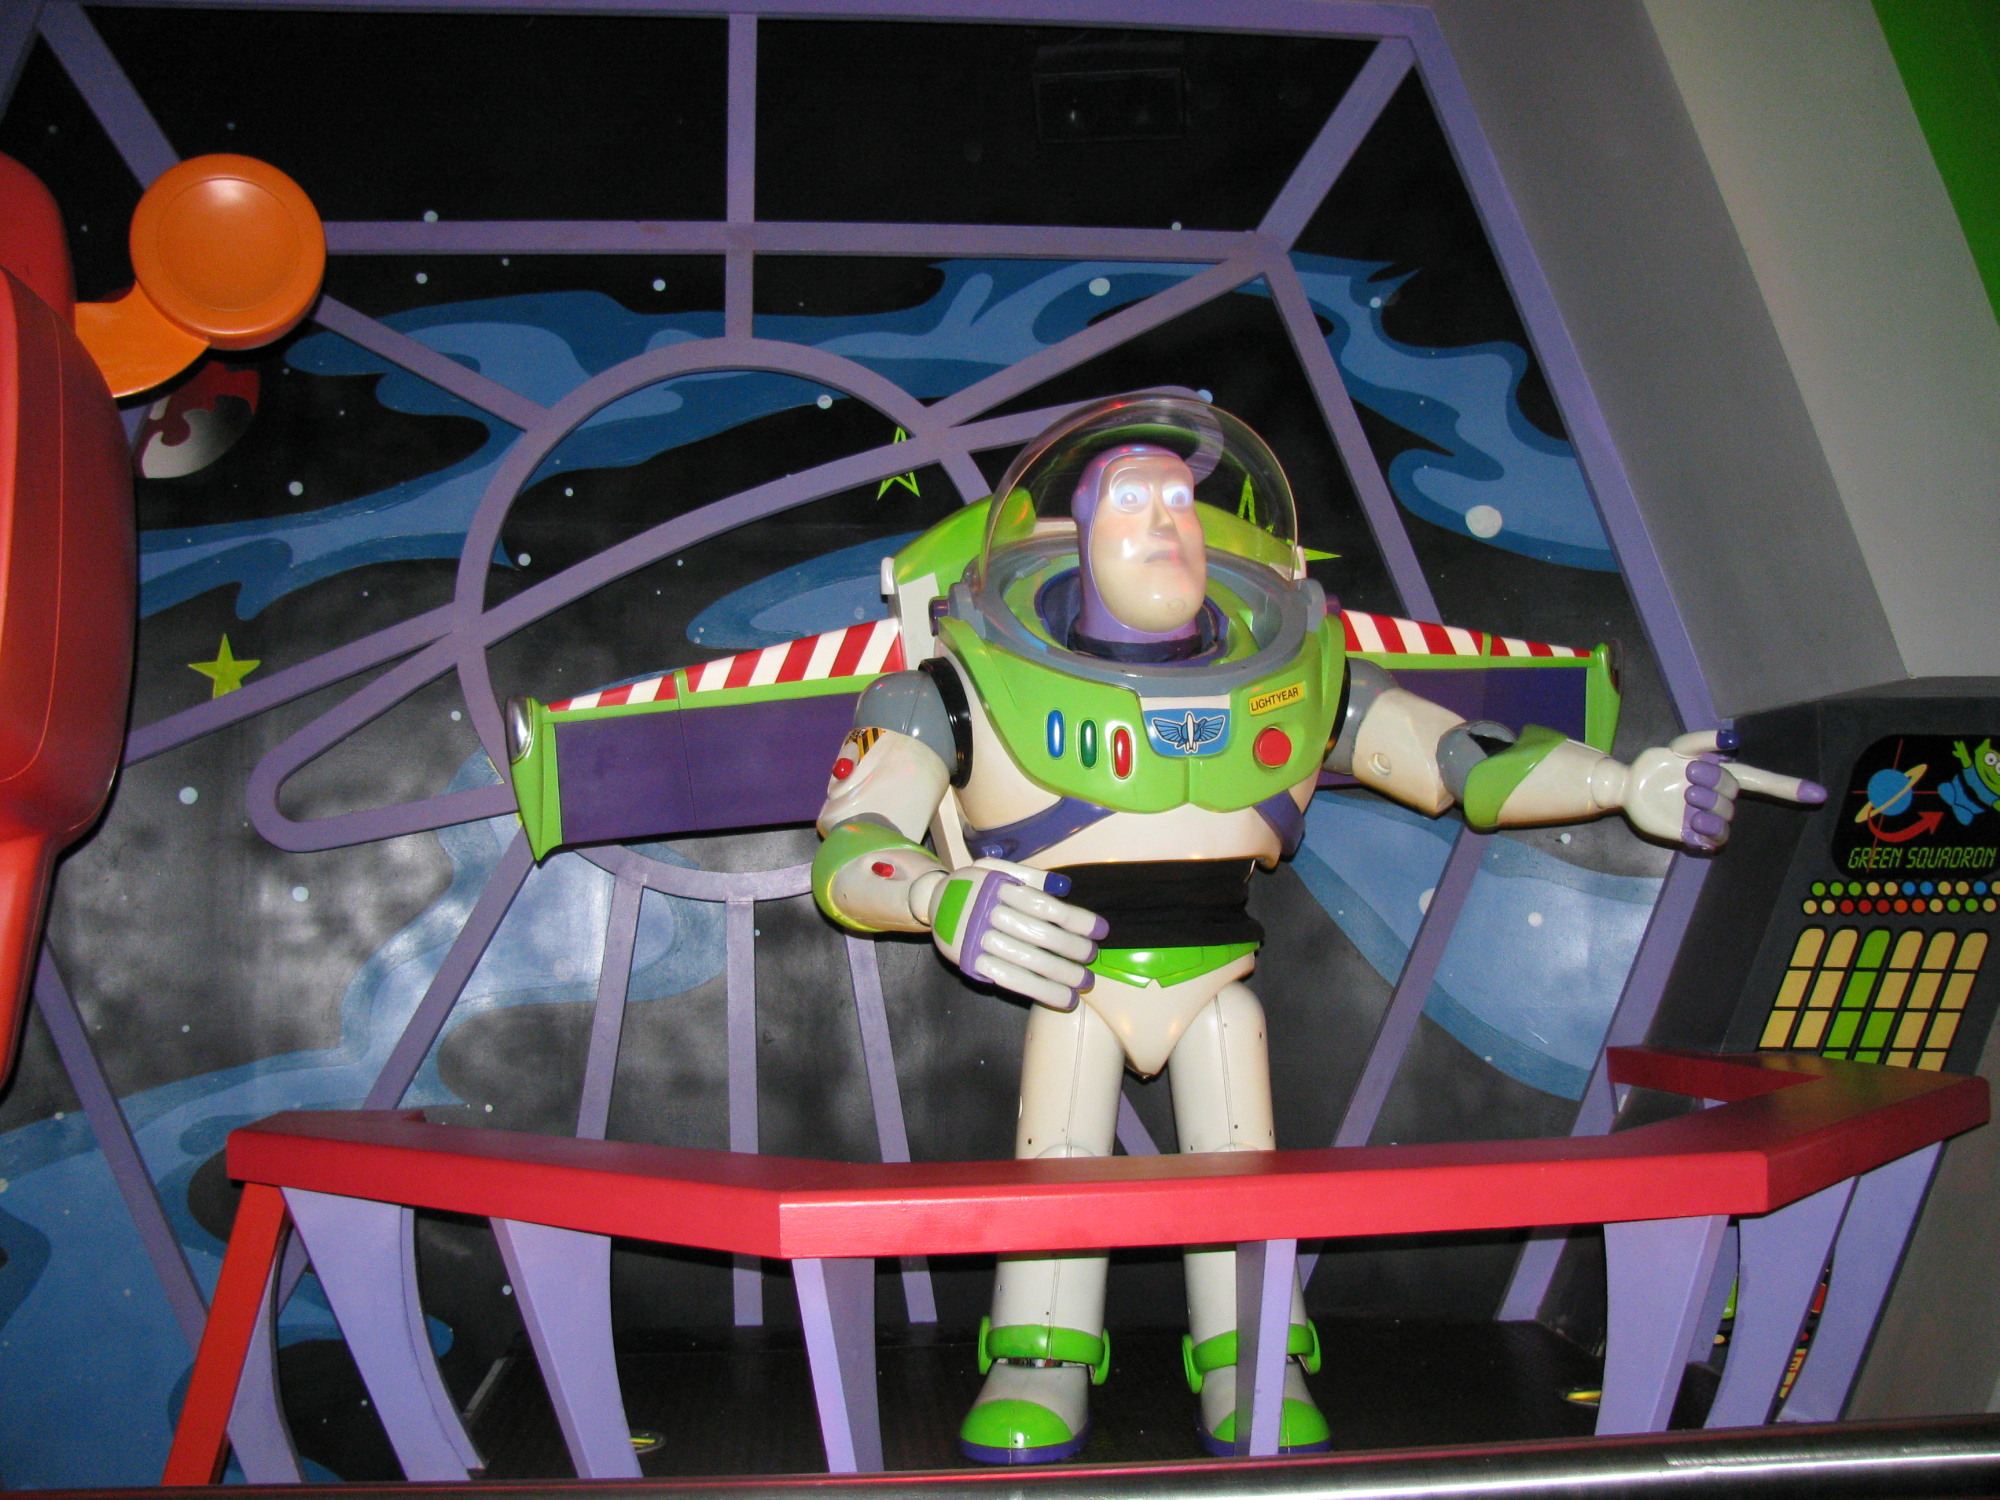 Tomorrowland - Buzz Lightyear's Space Ranger Spin